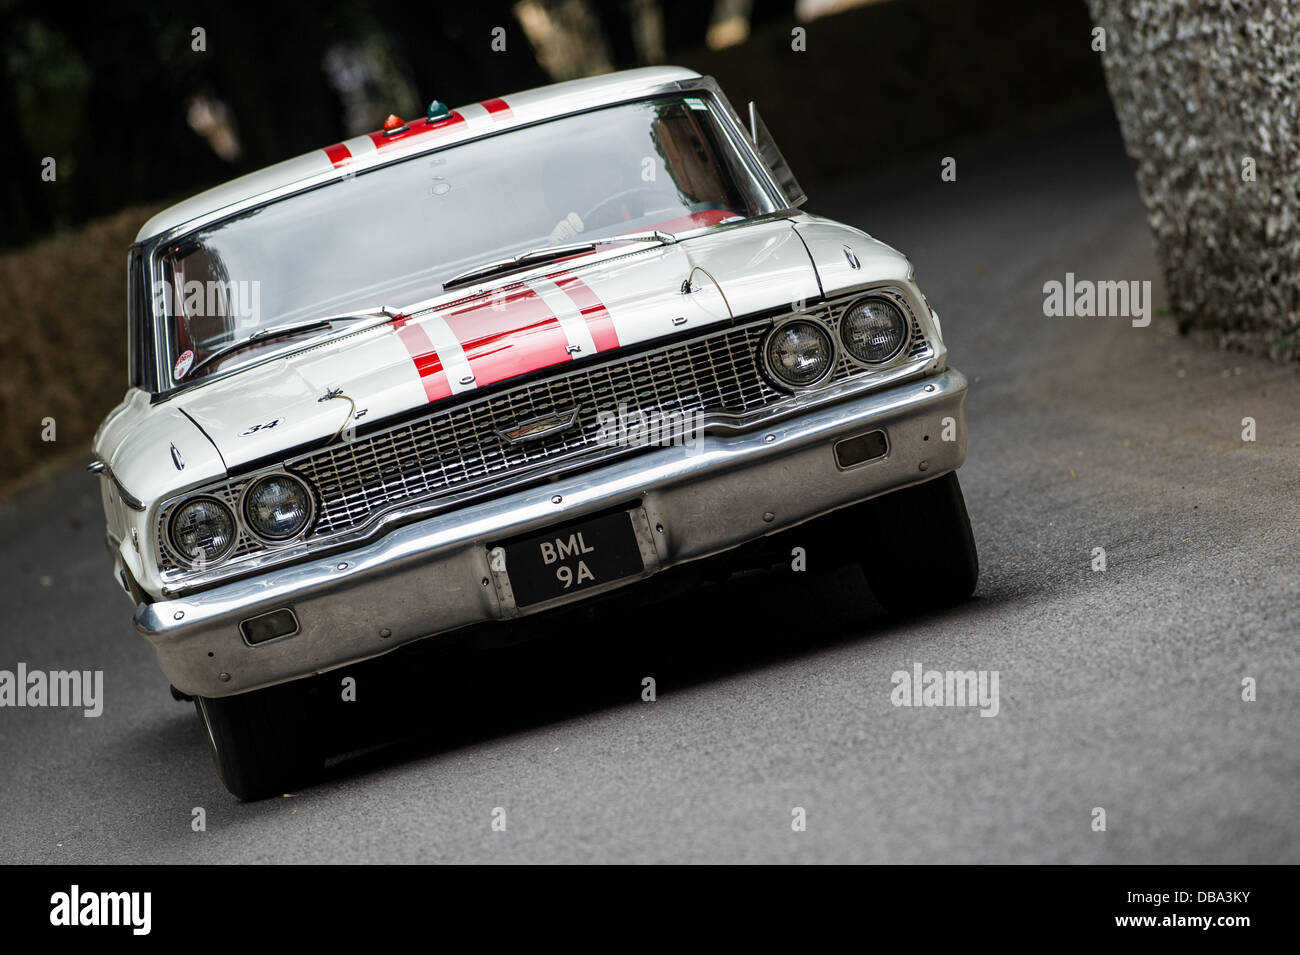 Chichester, UK - July 2013: Ford Galaxie 500 passes the flint wall in action at the Goodwood Festival of Speed on July 12, 2013. Stock Photo